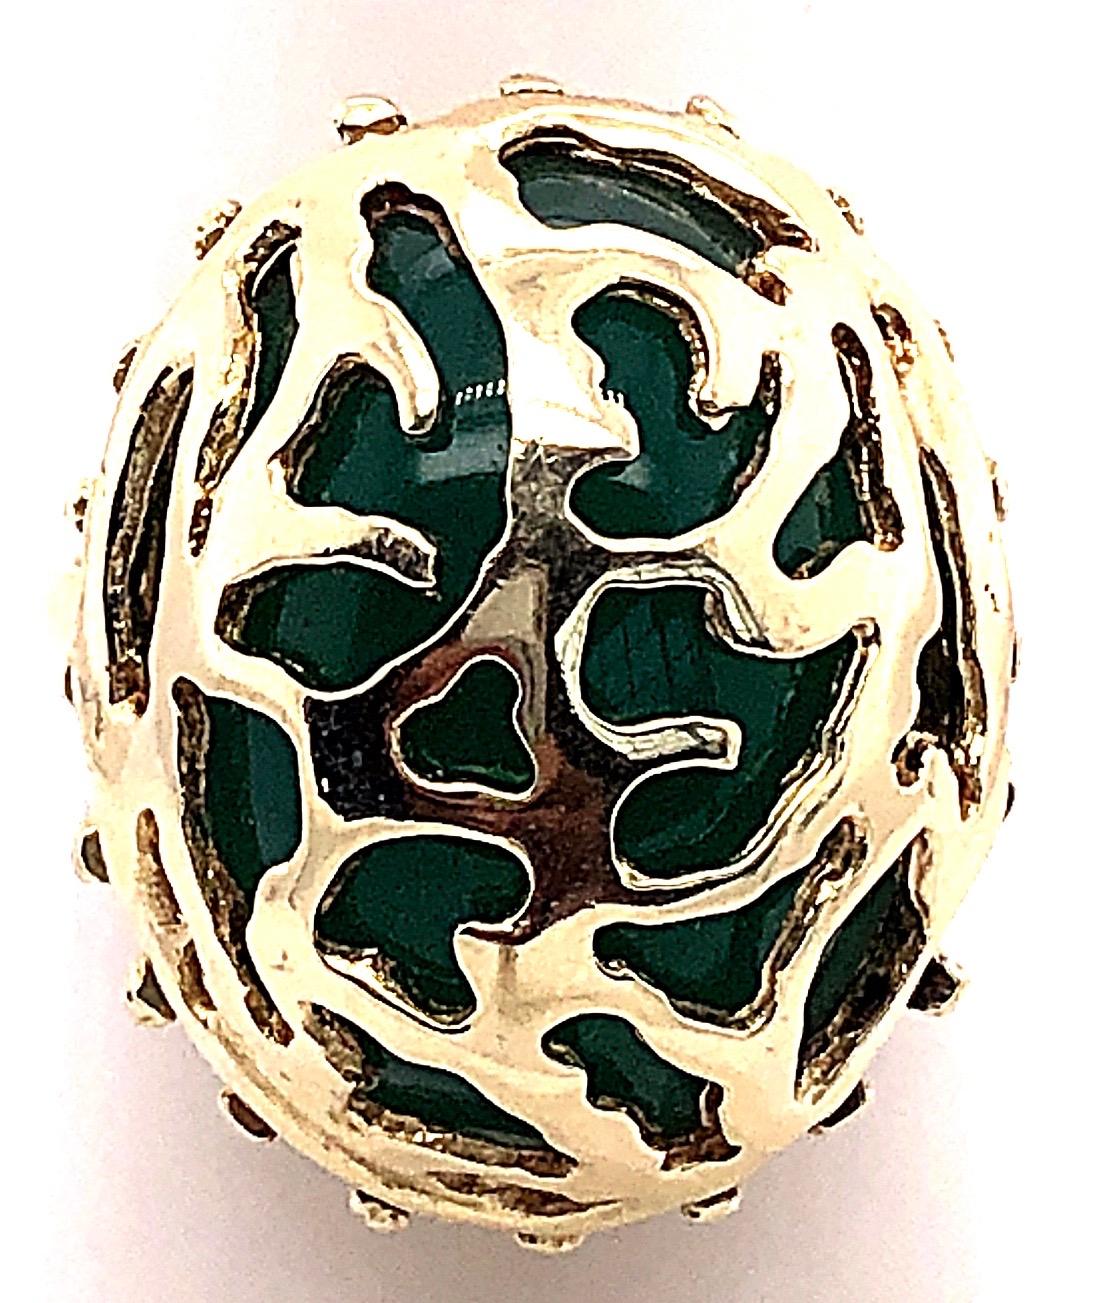 14 Karat Yellow Gold Oval Green Onyx With Filigree Overlay Solitaire Ring
Size 7
9.61 grams total weight.
Height: 25 mm
Width: 20 mm
Diameter: 10 mm